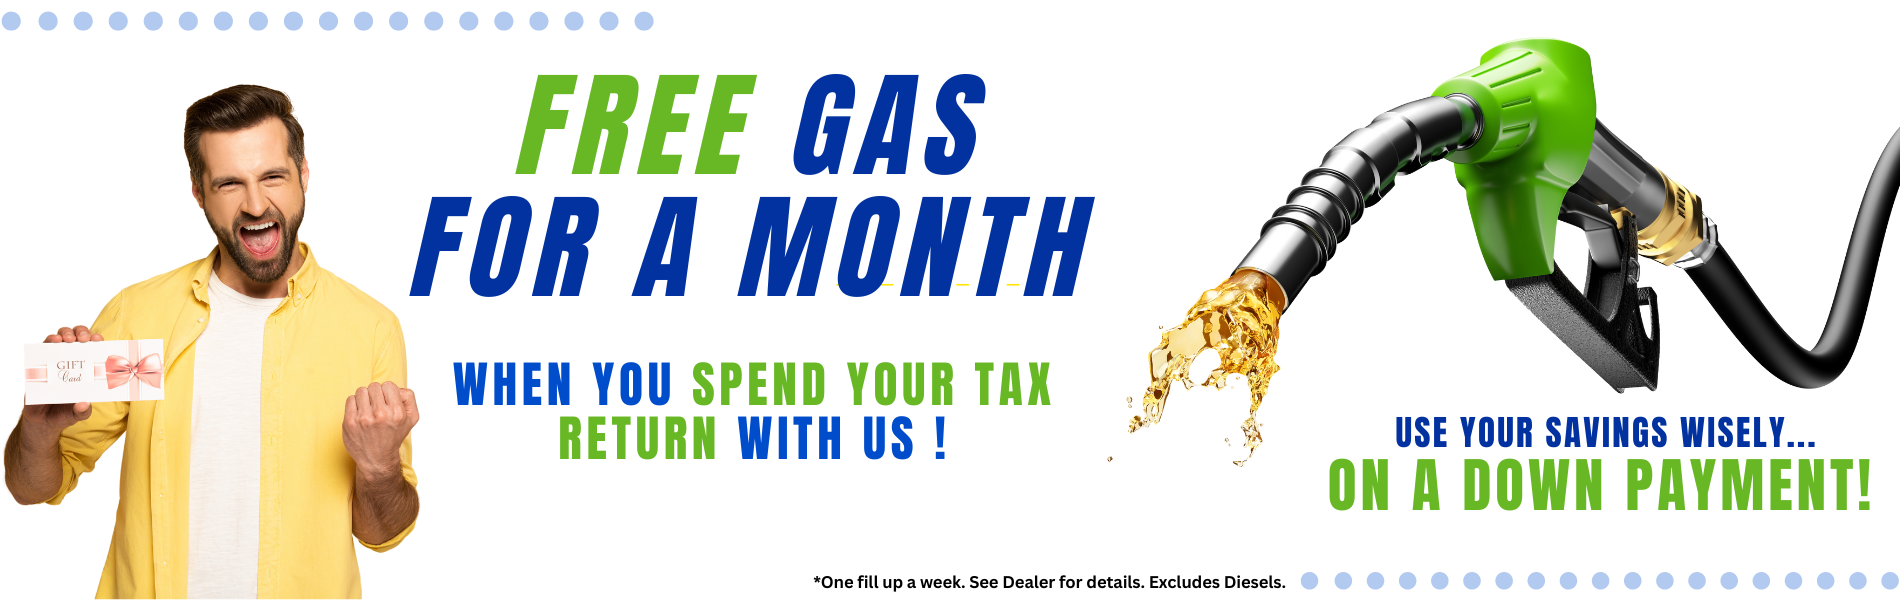 Free Gas for A Month